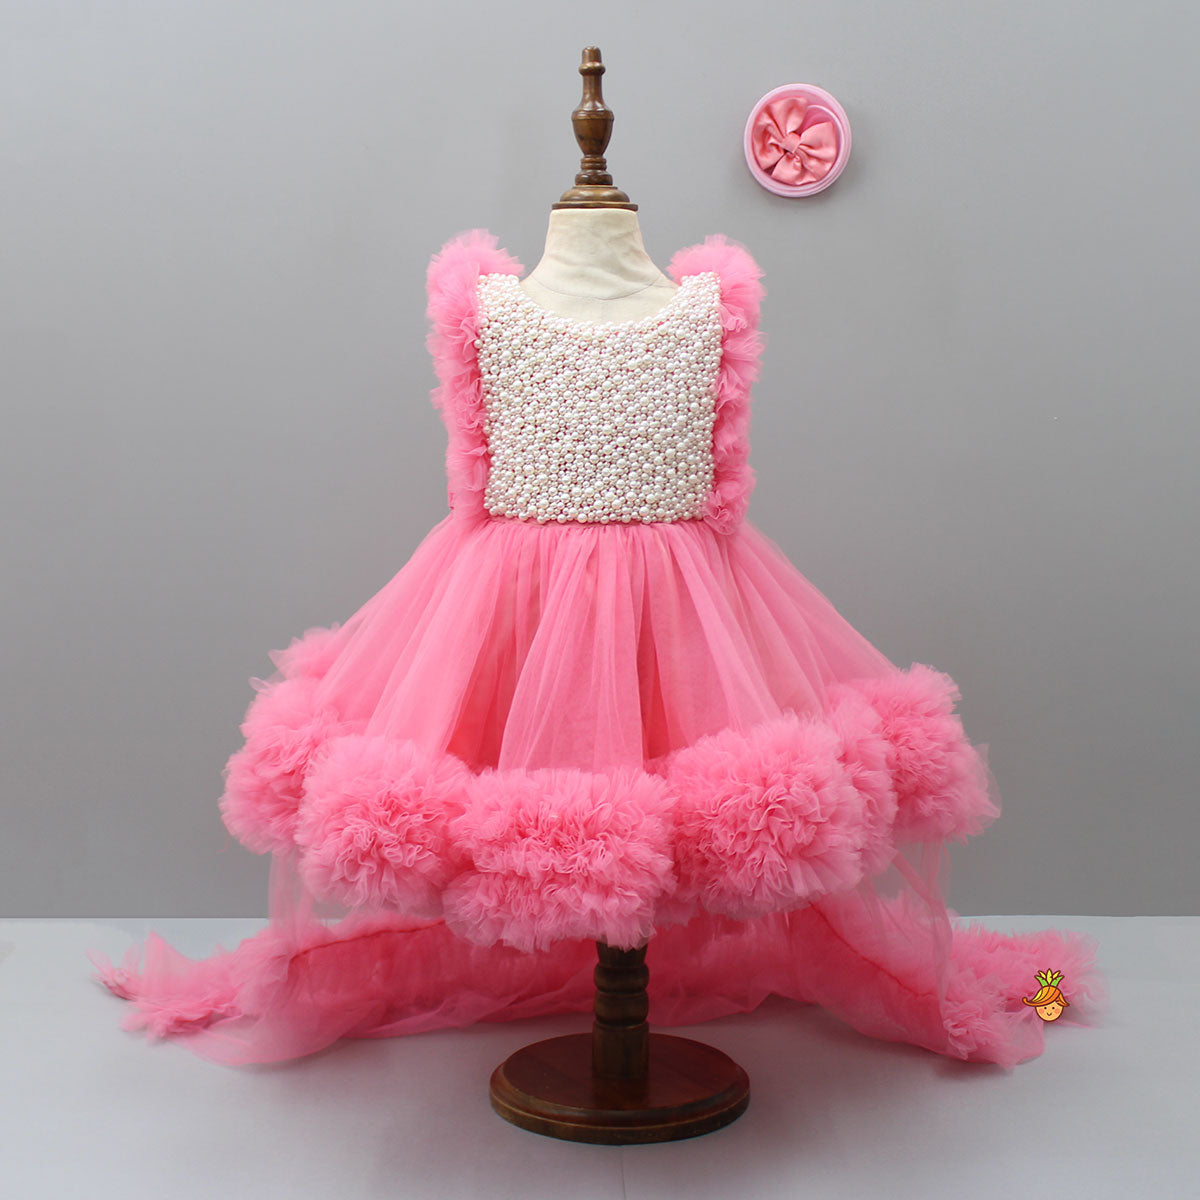 Pre Order: Embroidered Yoke Ruffle Hem Pink Dress With Detachable Trail And Matching Hair Clip